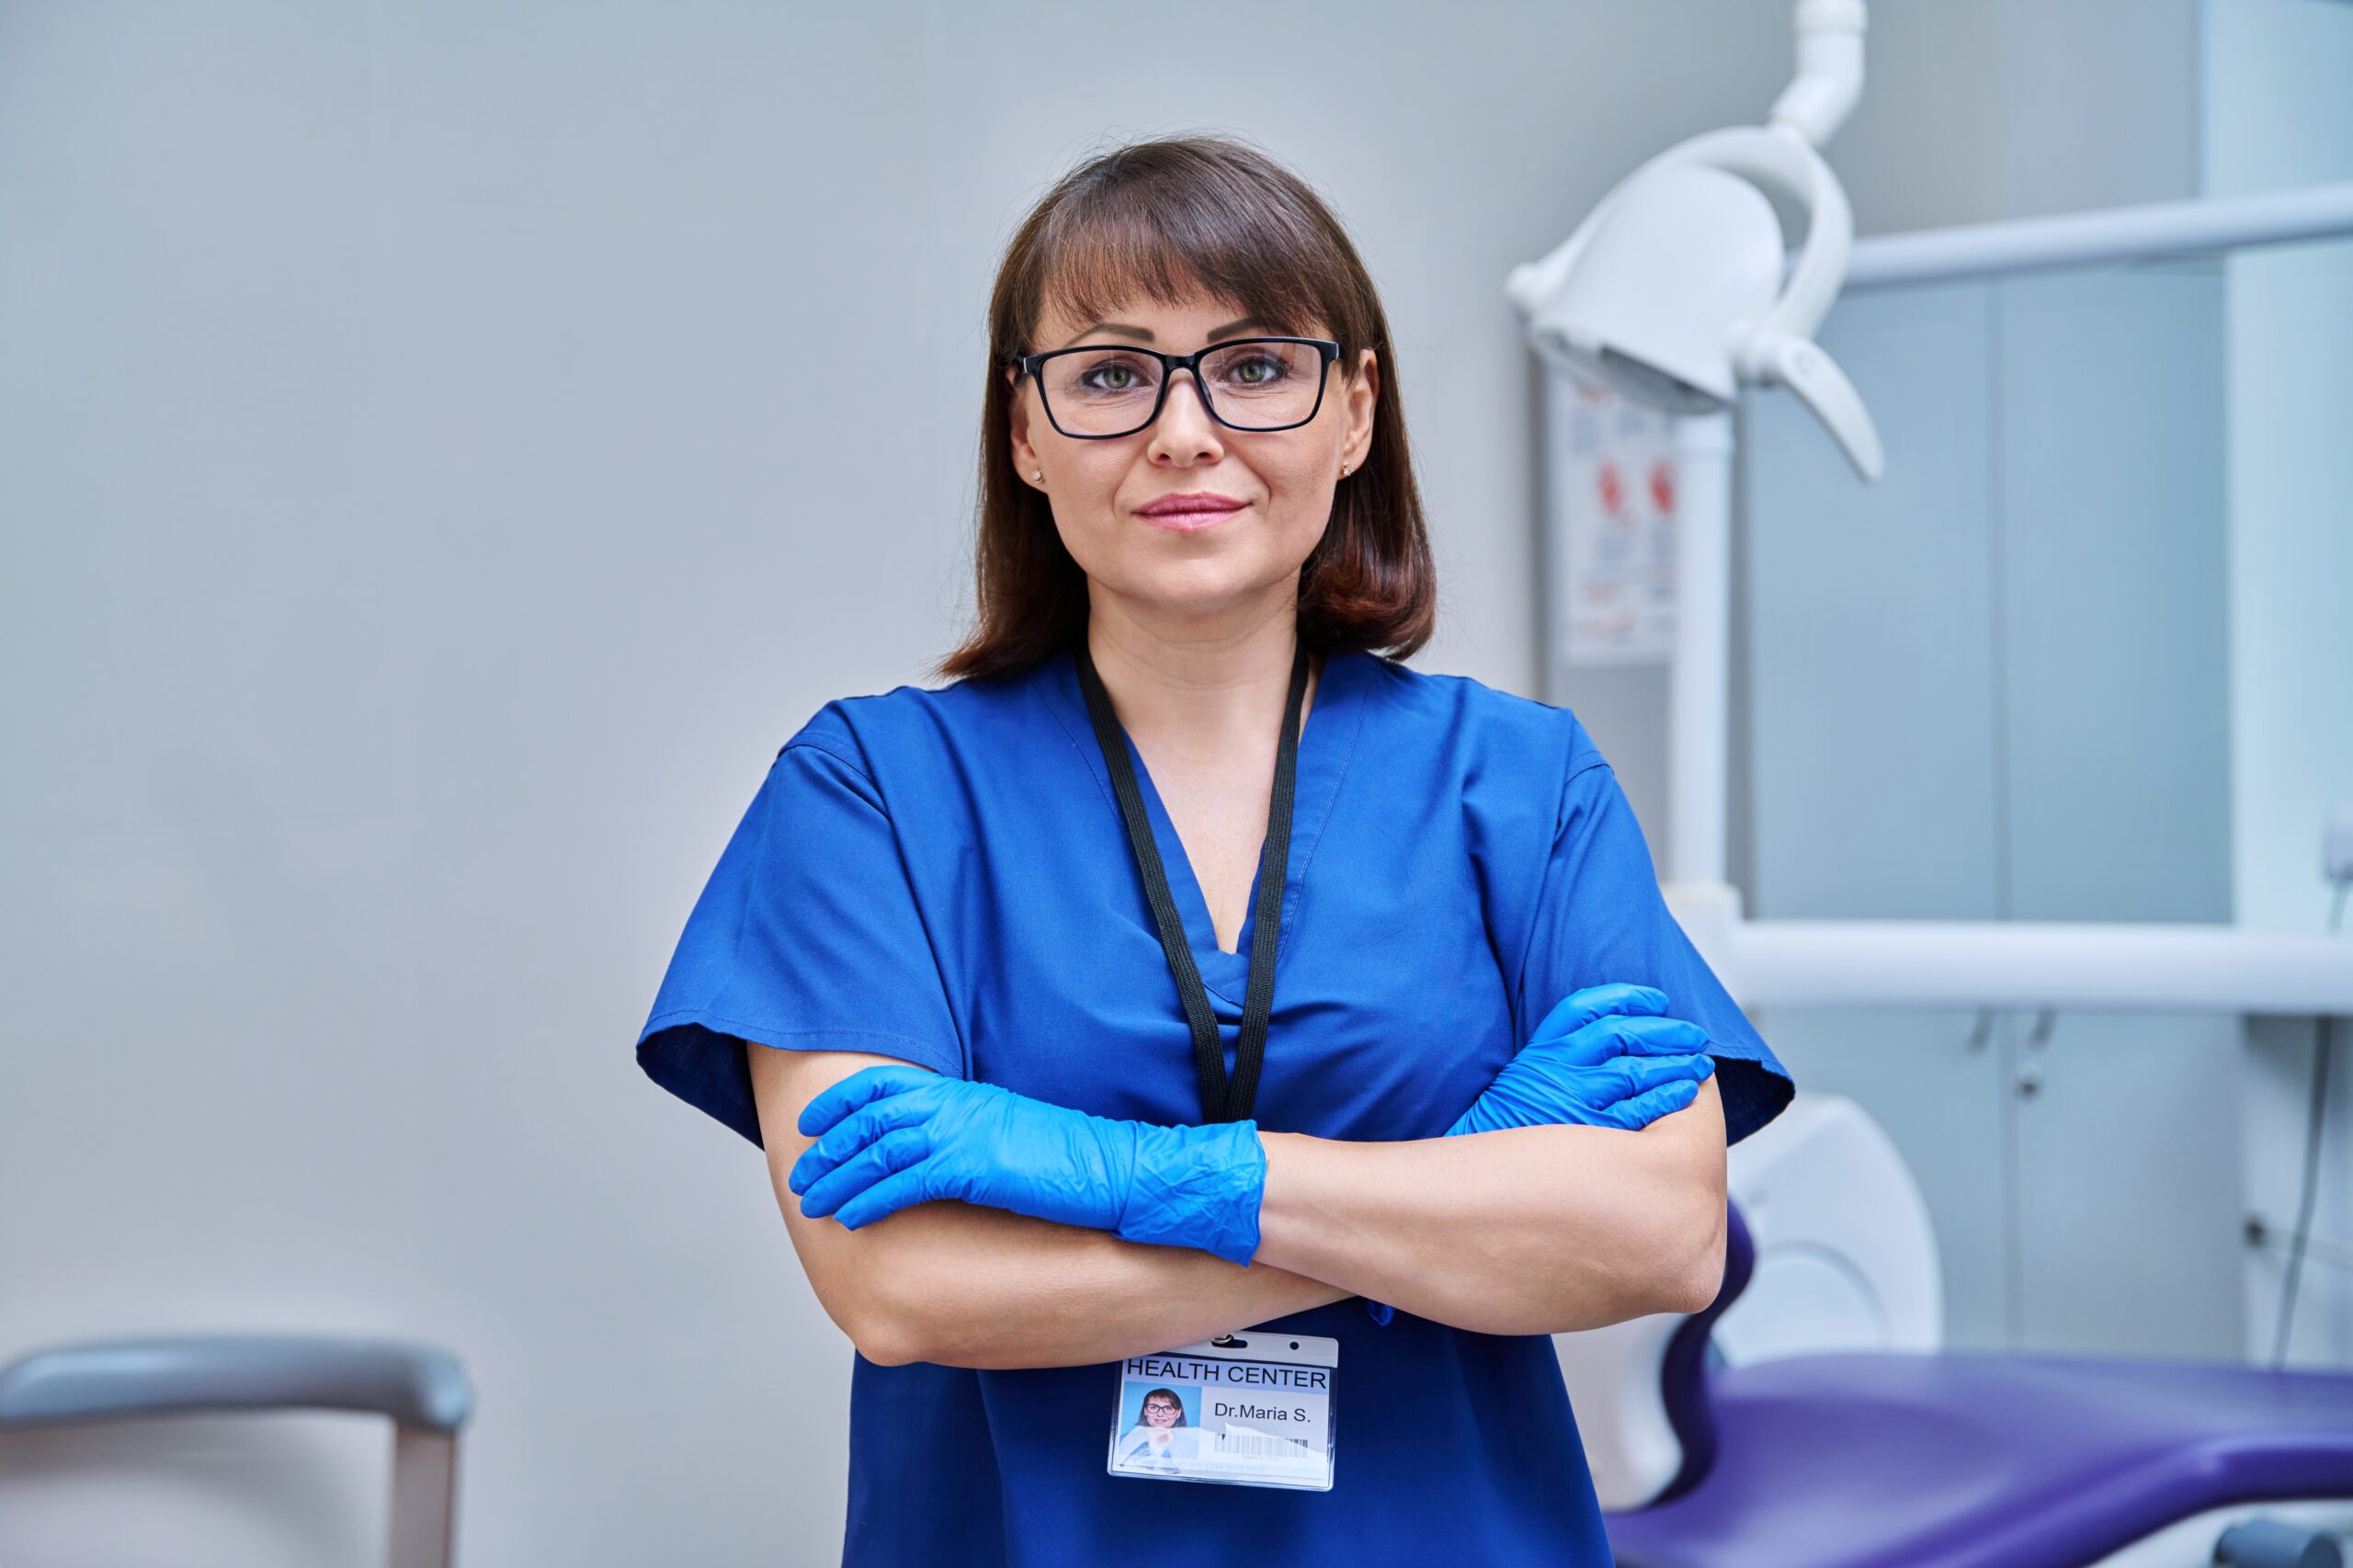 Lakeside smile female doctor dentist in office. Confident middle aged woman looking at camera with crossed arms near dental chair. Dentistry, medicine, specialist, career, dental health care concept,